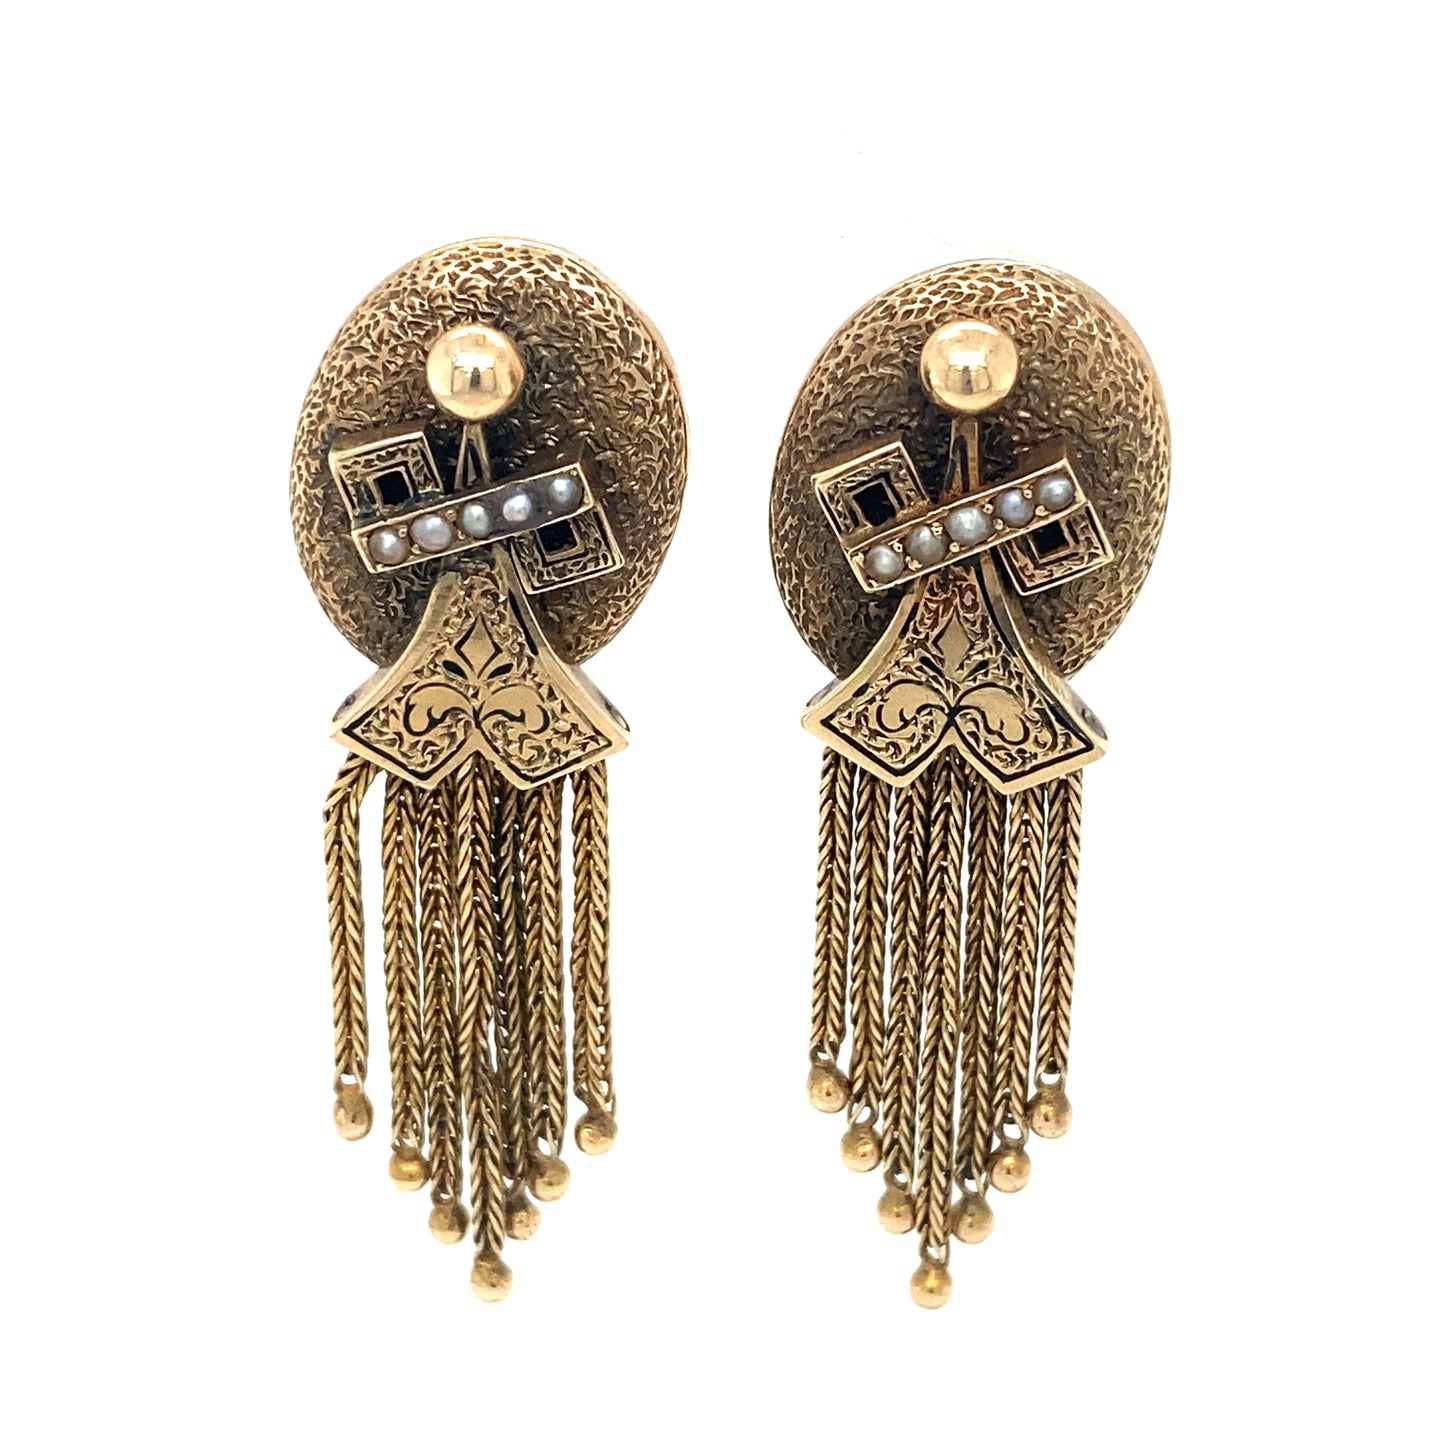 Circa 1870s Victorian Oval Seed Pearl Earrings with Tassels in 14K Gold